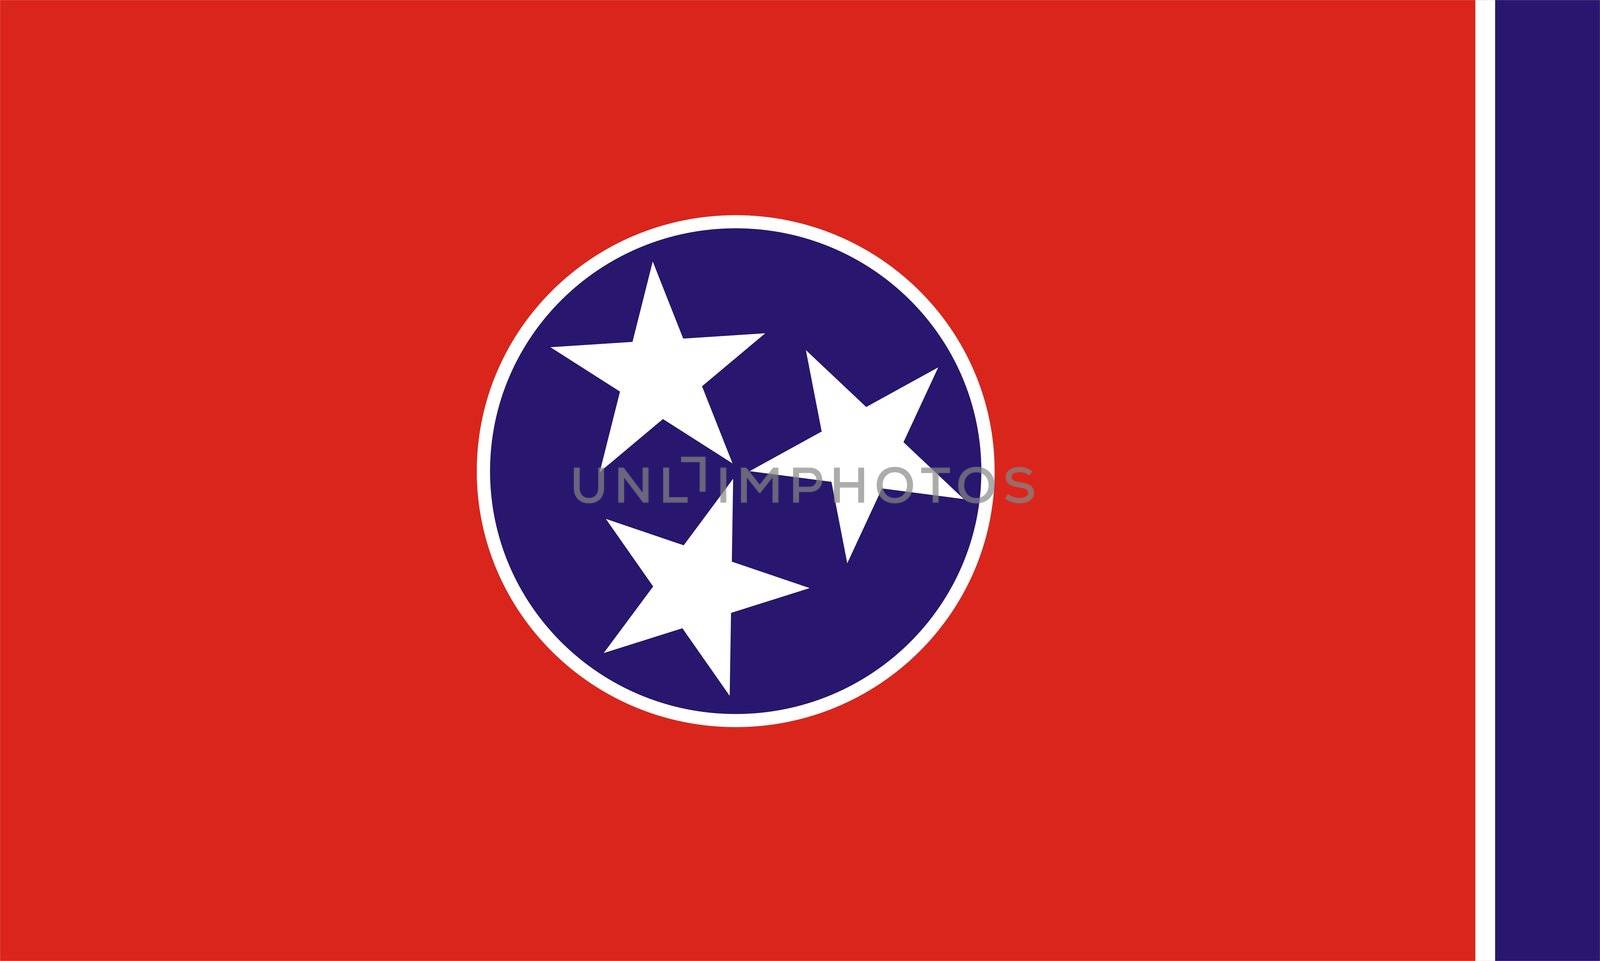 2D illustration of Tennessee flag american state vector
